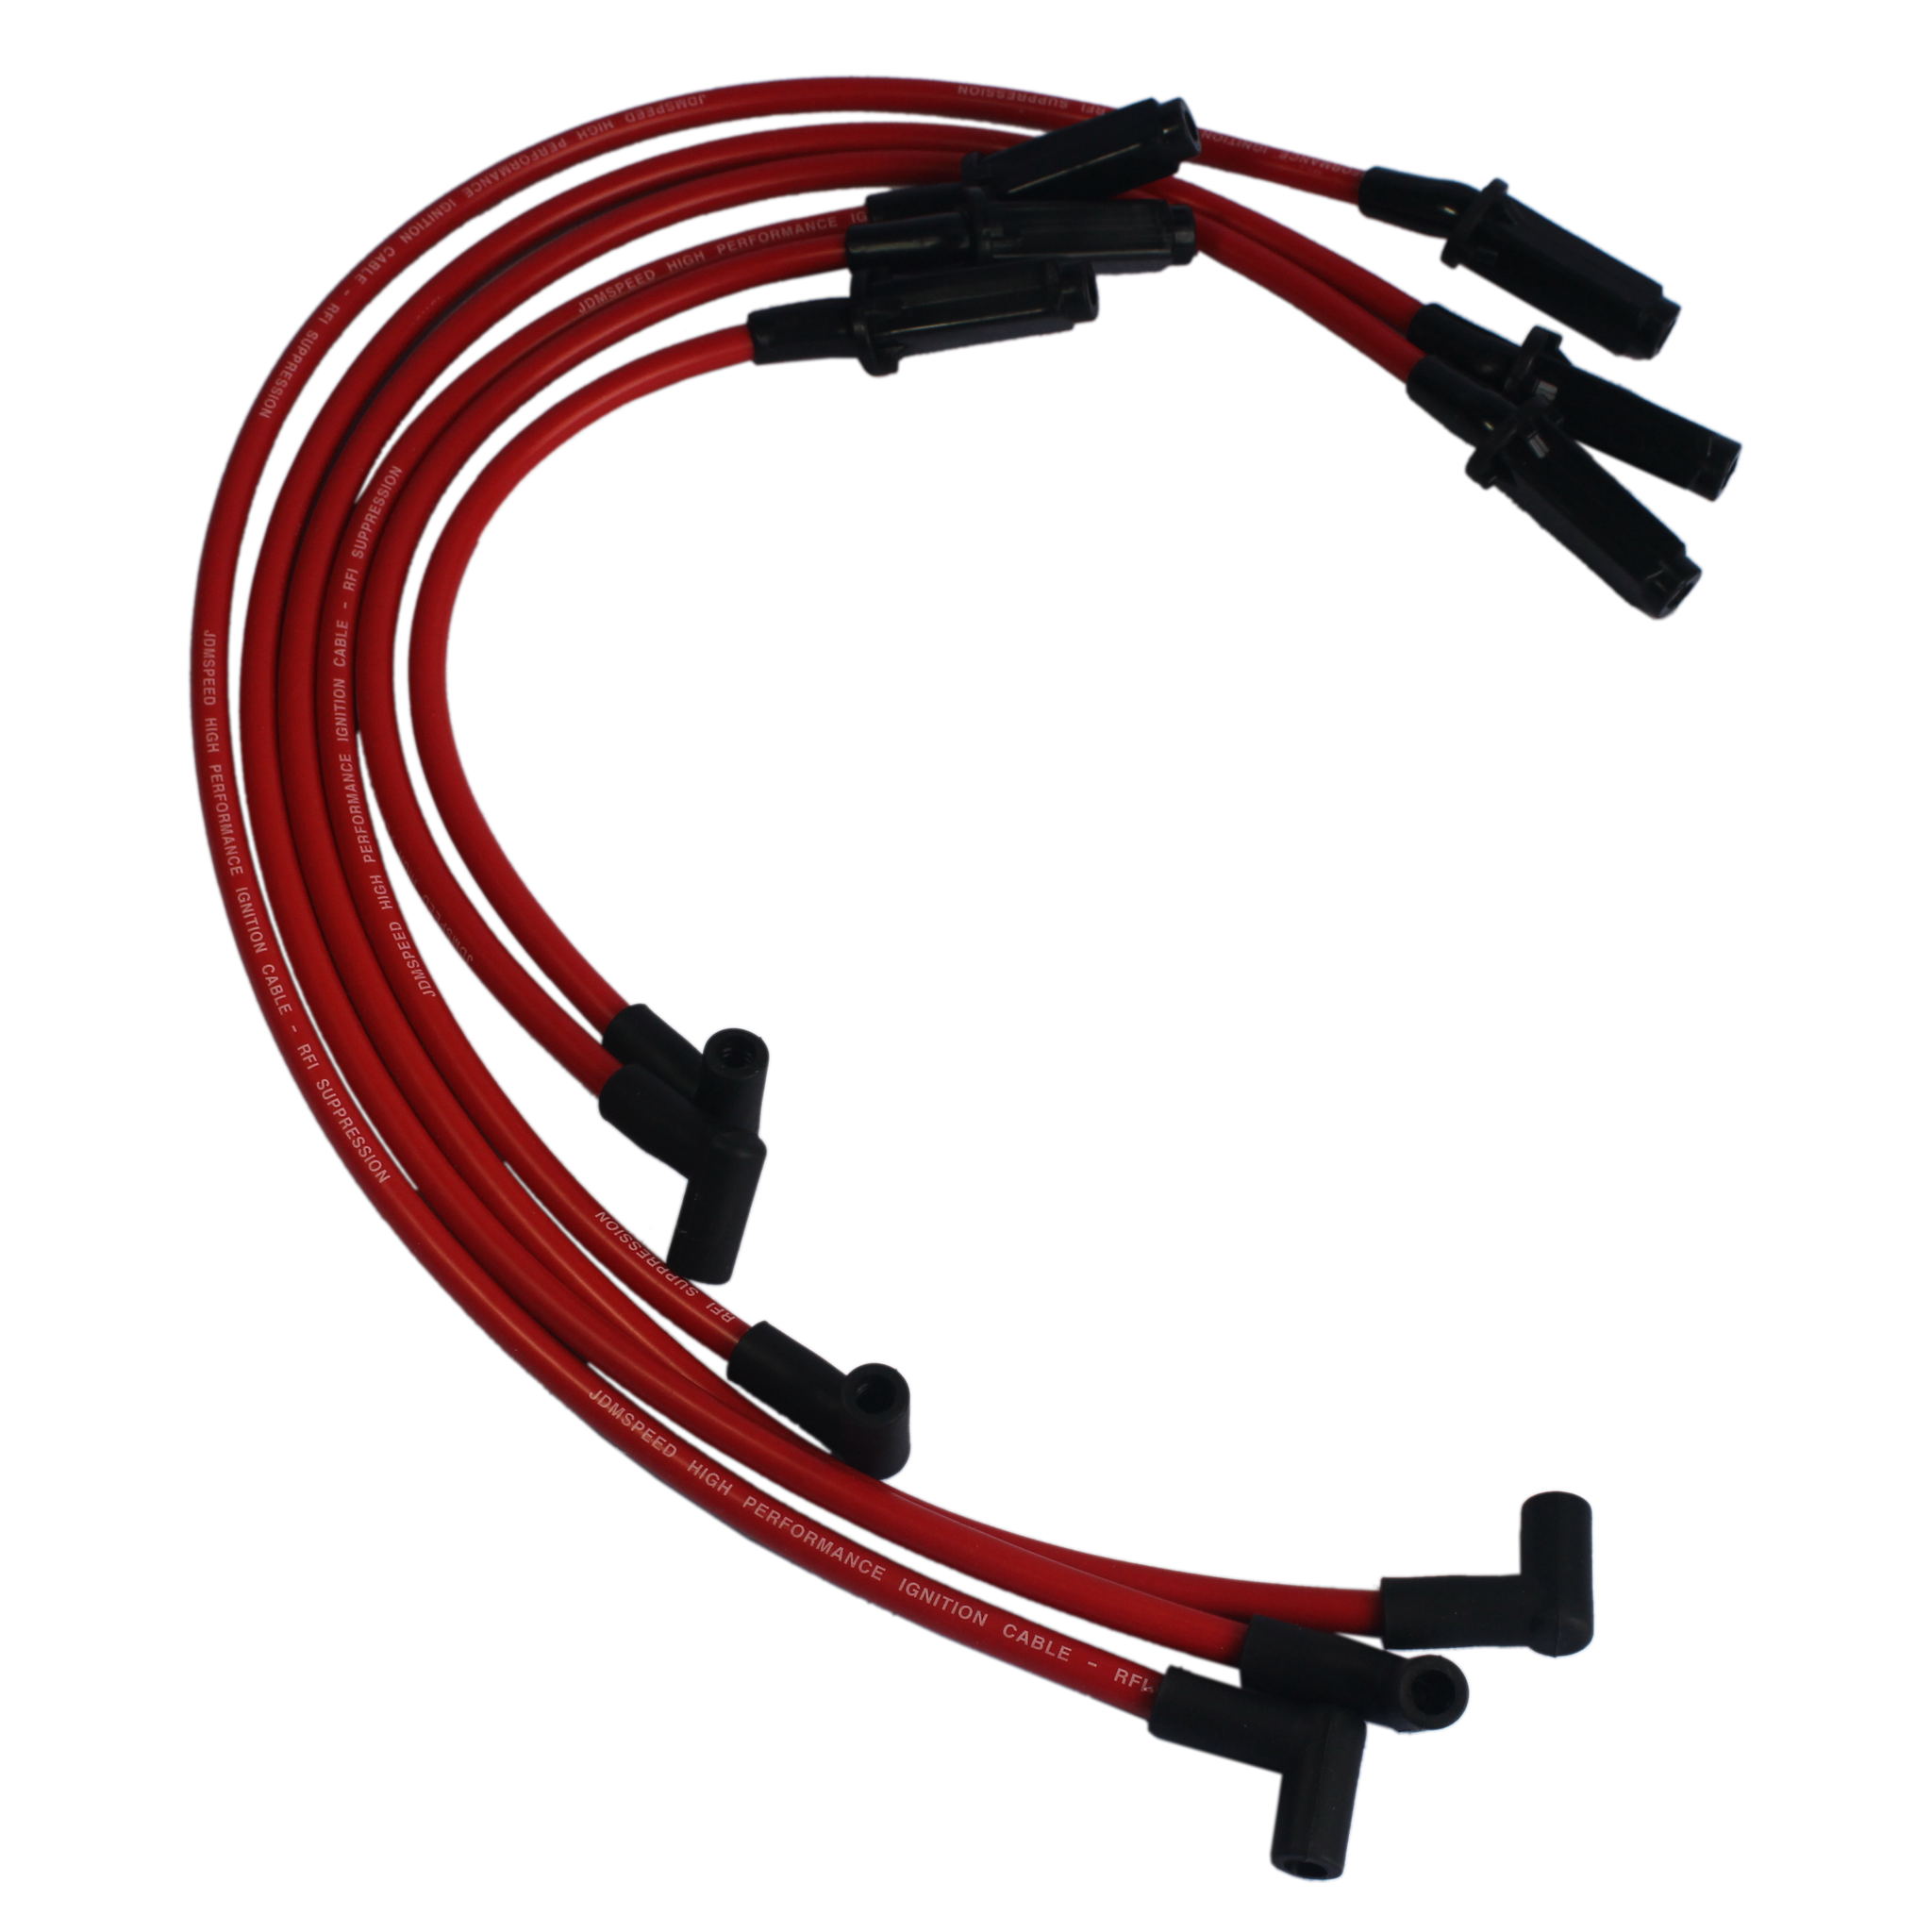 90 Degree Suppressed Ignition Wires, Blue - EMPI